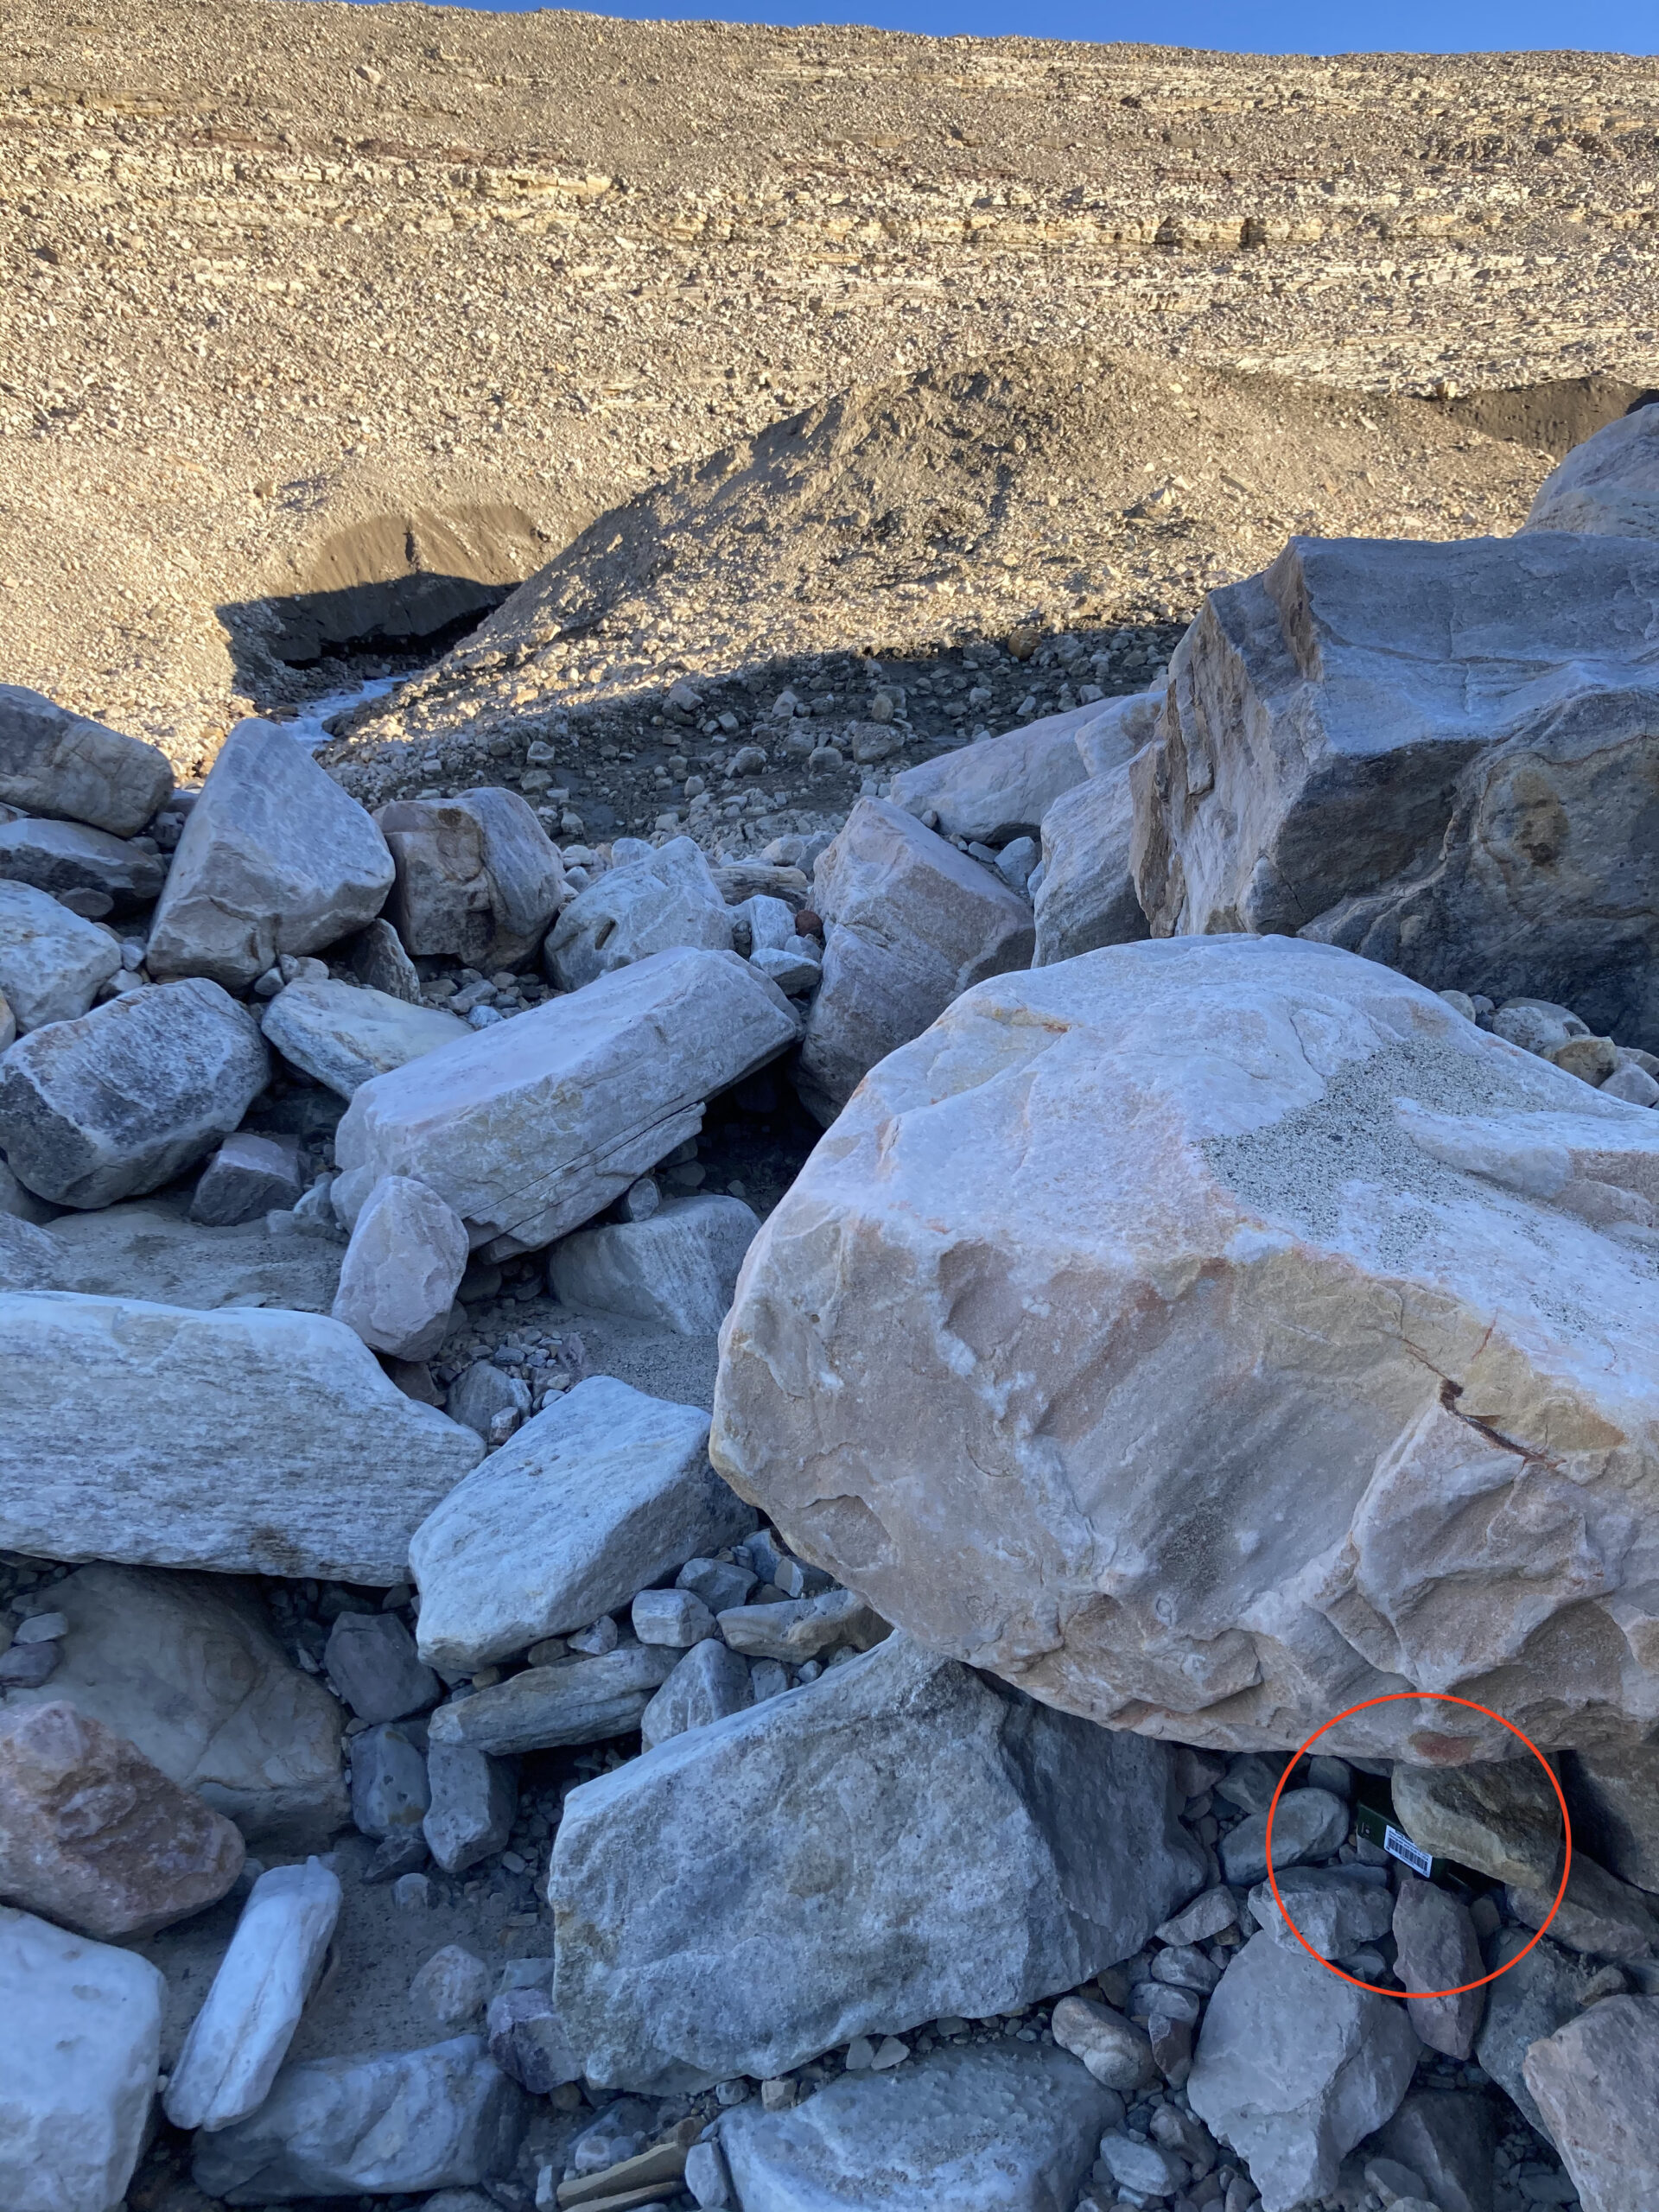 In the proposed method, an acoustic sensor is deployed in a sheltered location (red circle, bottom right, under the large rock) near the glacier to continuously record sounds; a much easier and simpler process (Photo: Evgeny Podolskiy).